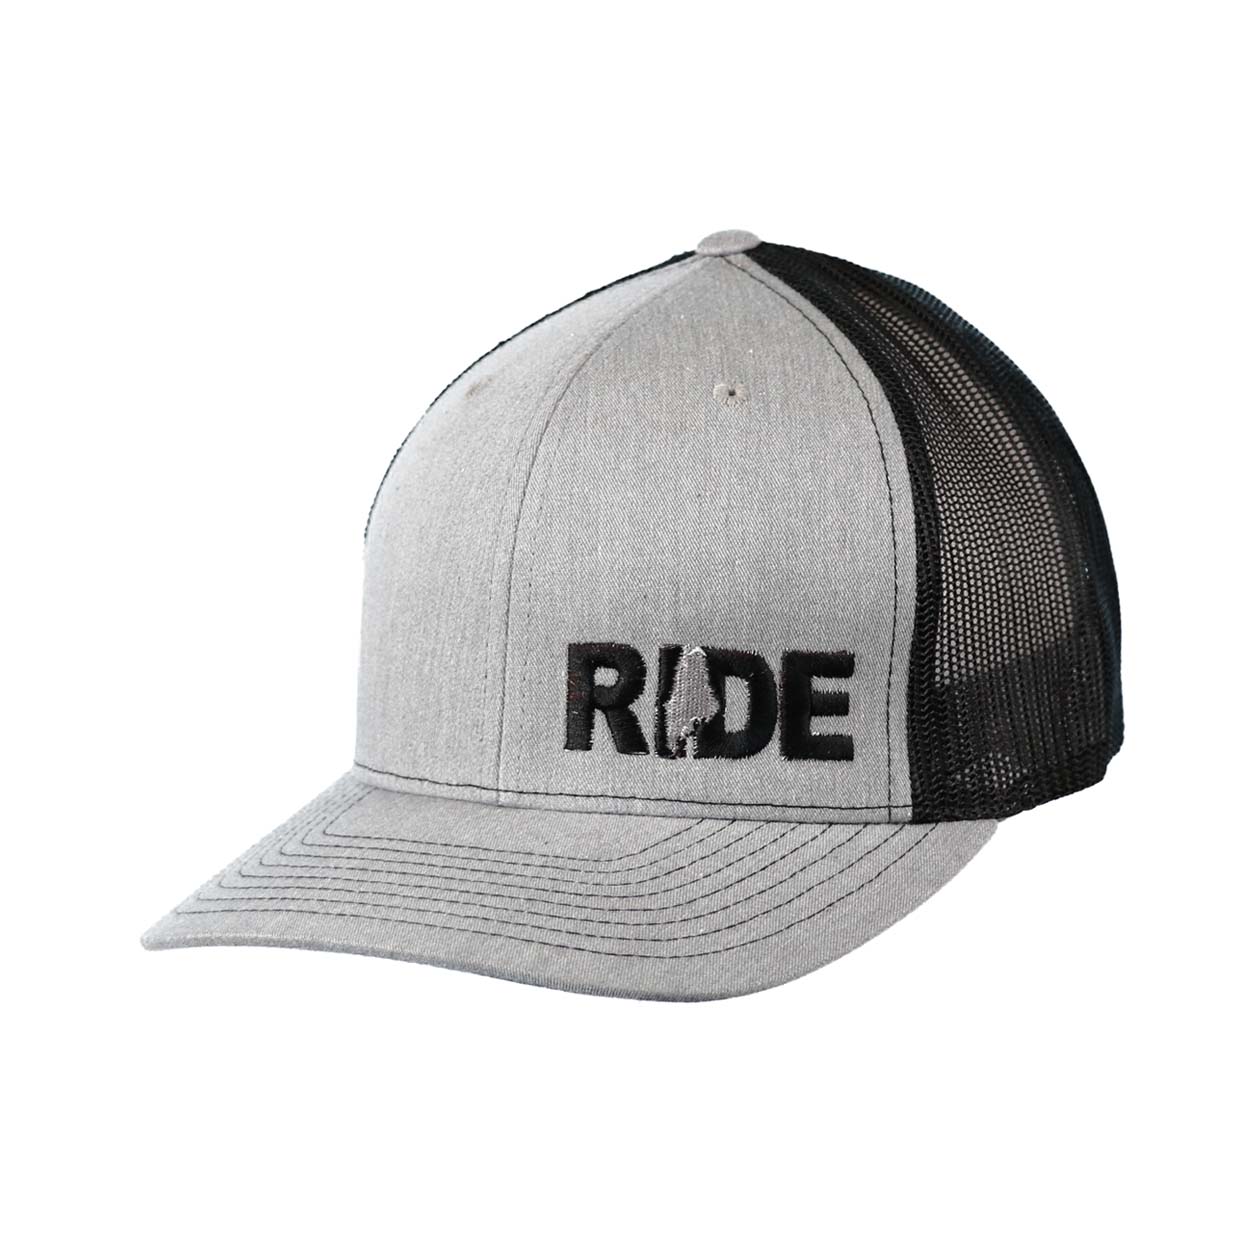 Ride Maine Classic Pro Night Out Embroidered Snapback Trucker Hat Heather Gray/Black